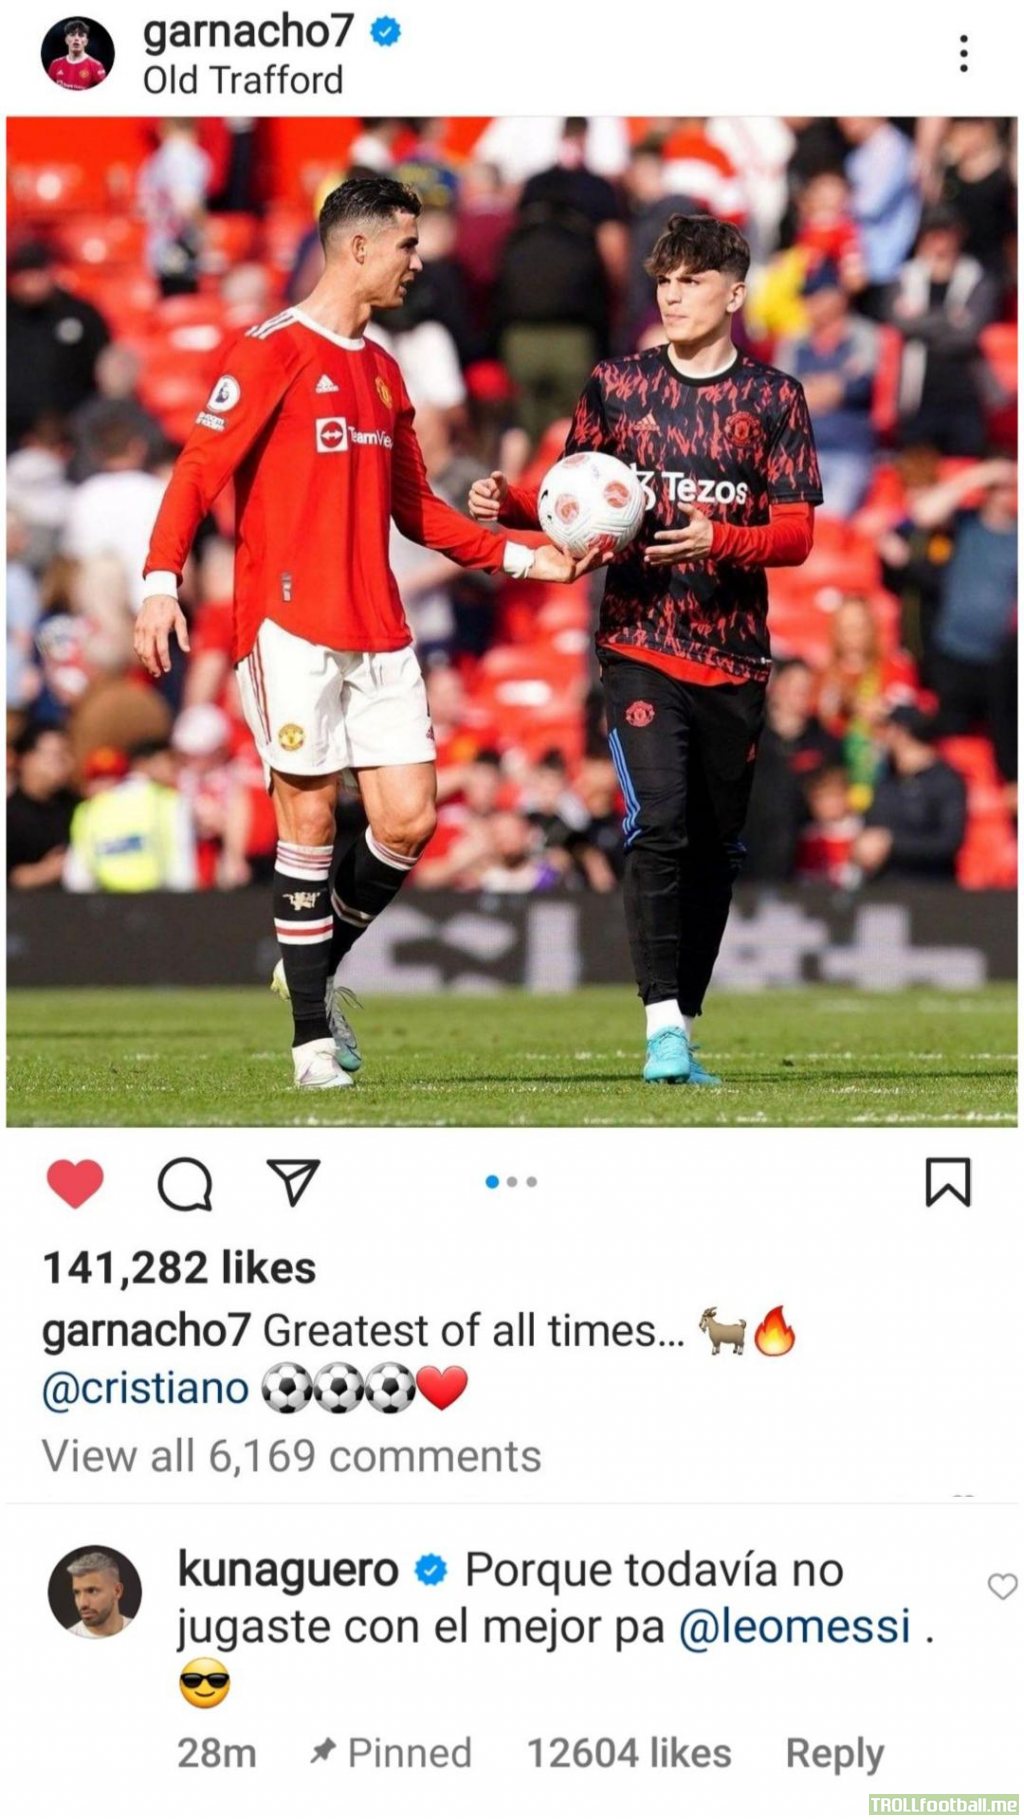 Aguero comment on Granacho post: Because you haven't played with the best yet..Lionel Messi.